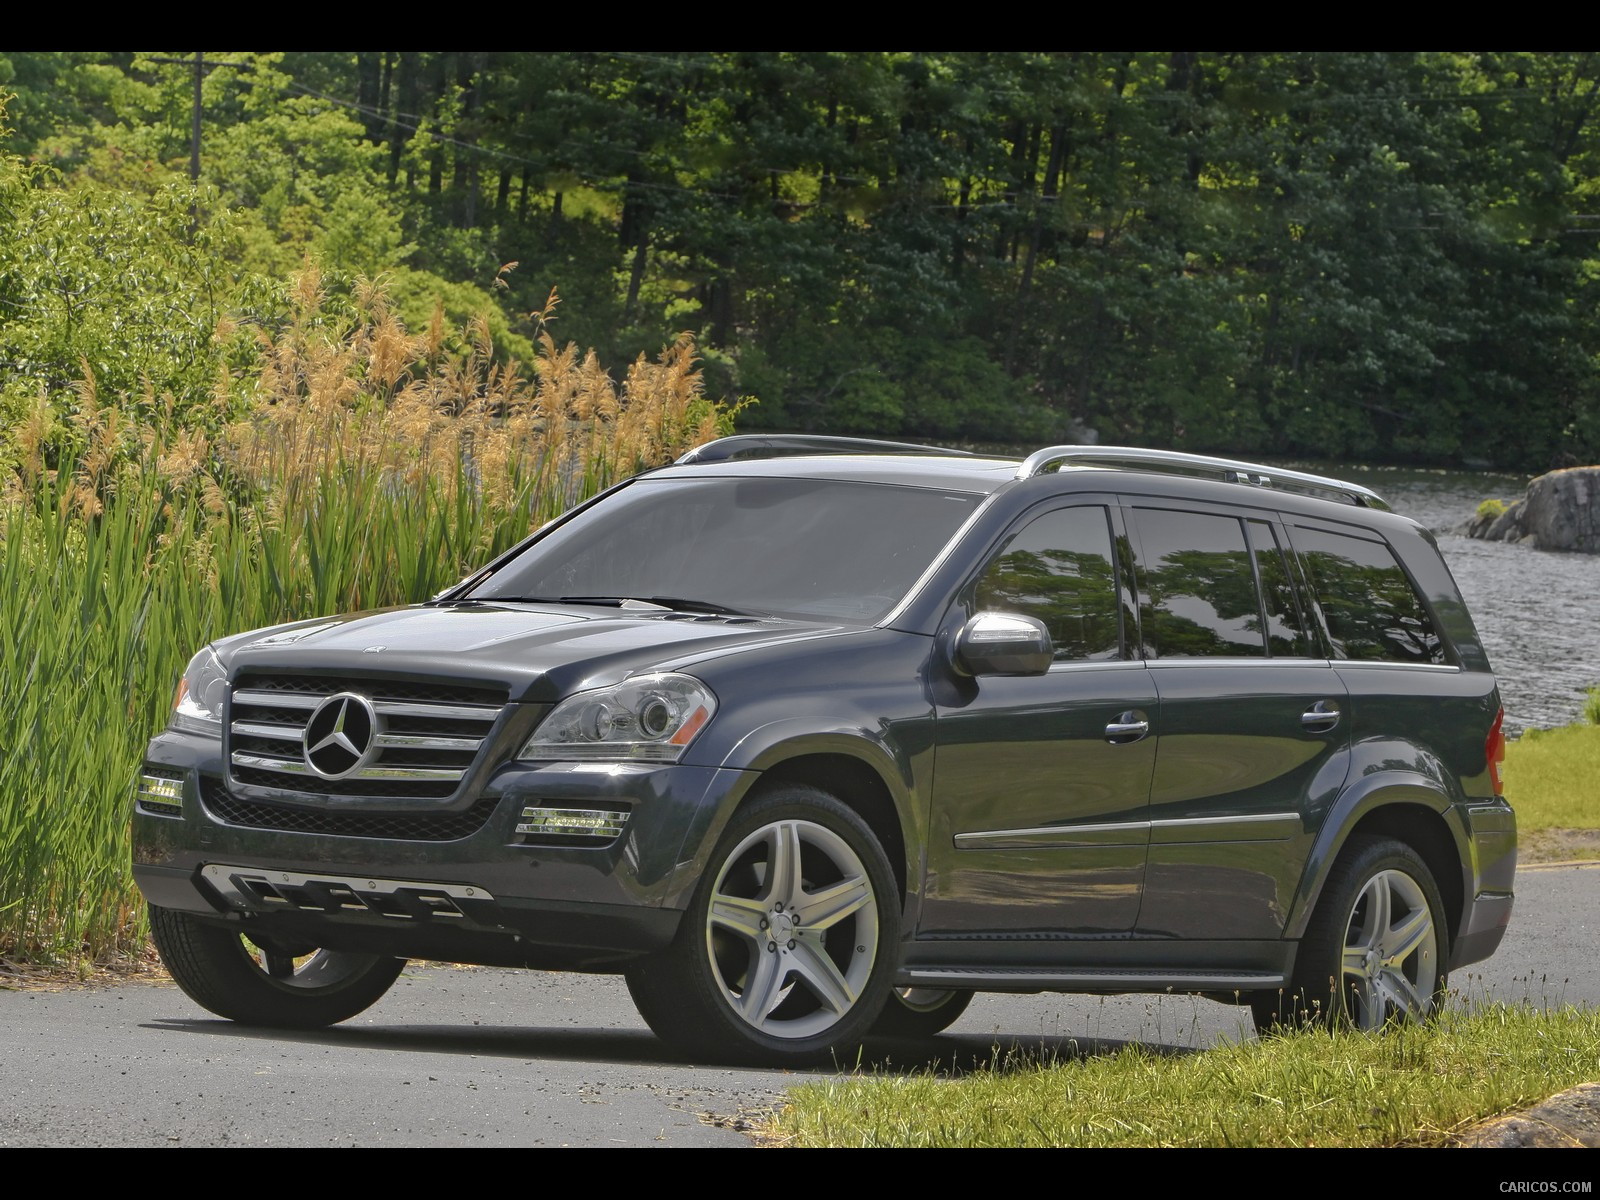 2010 Mercedes-Benz GL550 - Front, #55 of 112